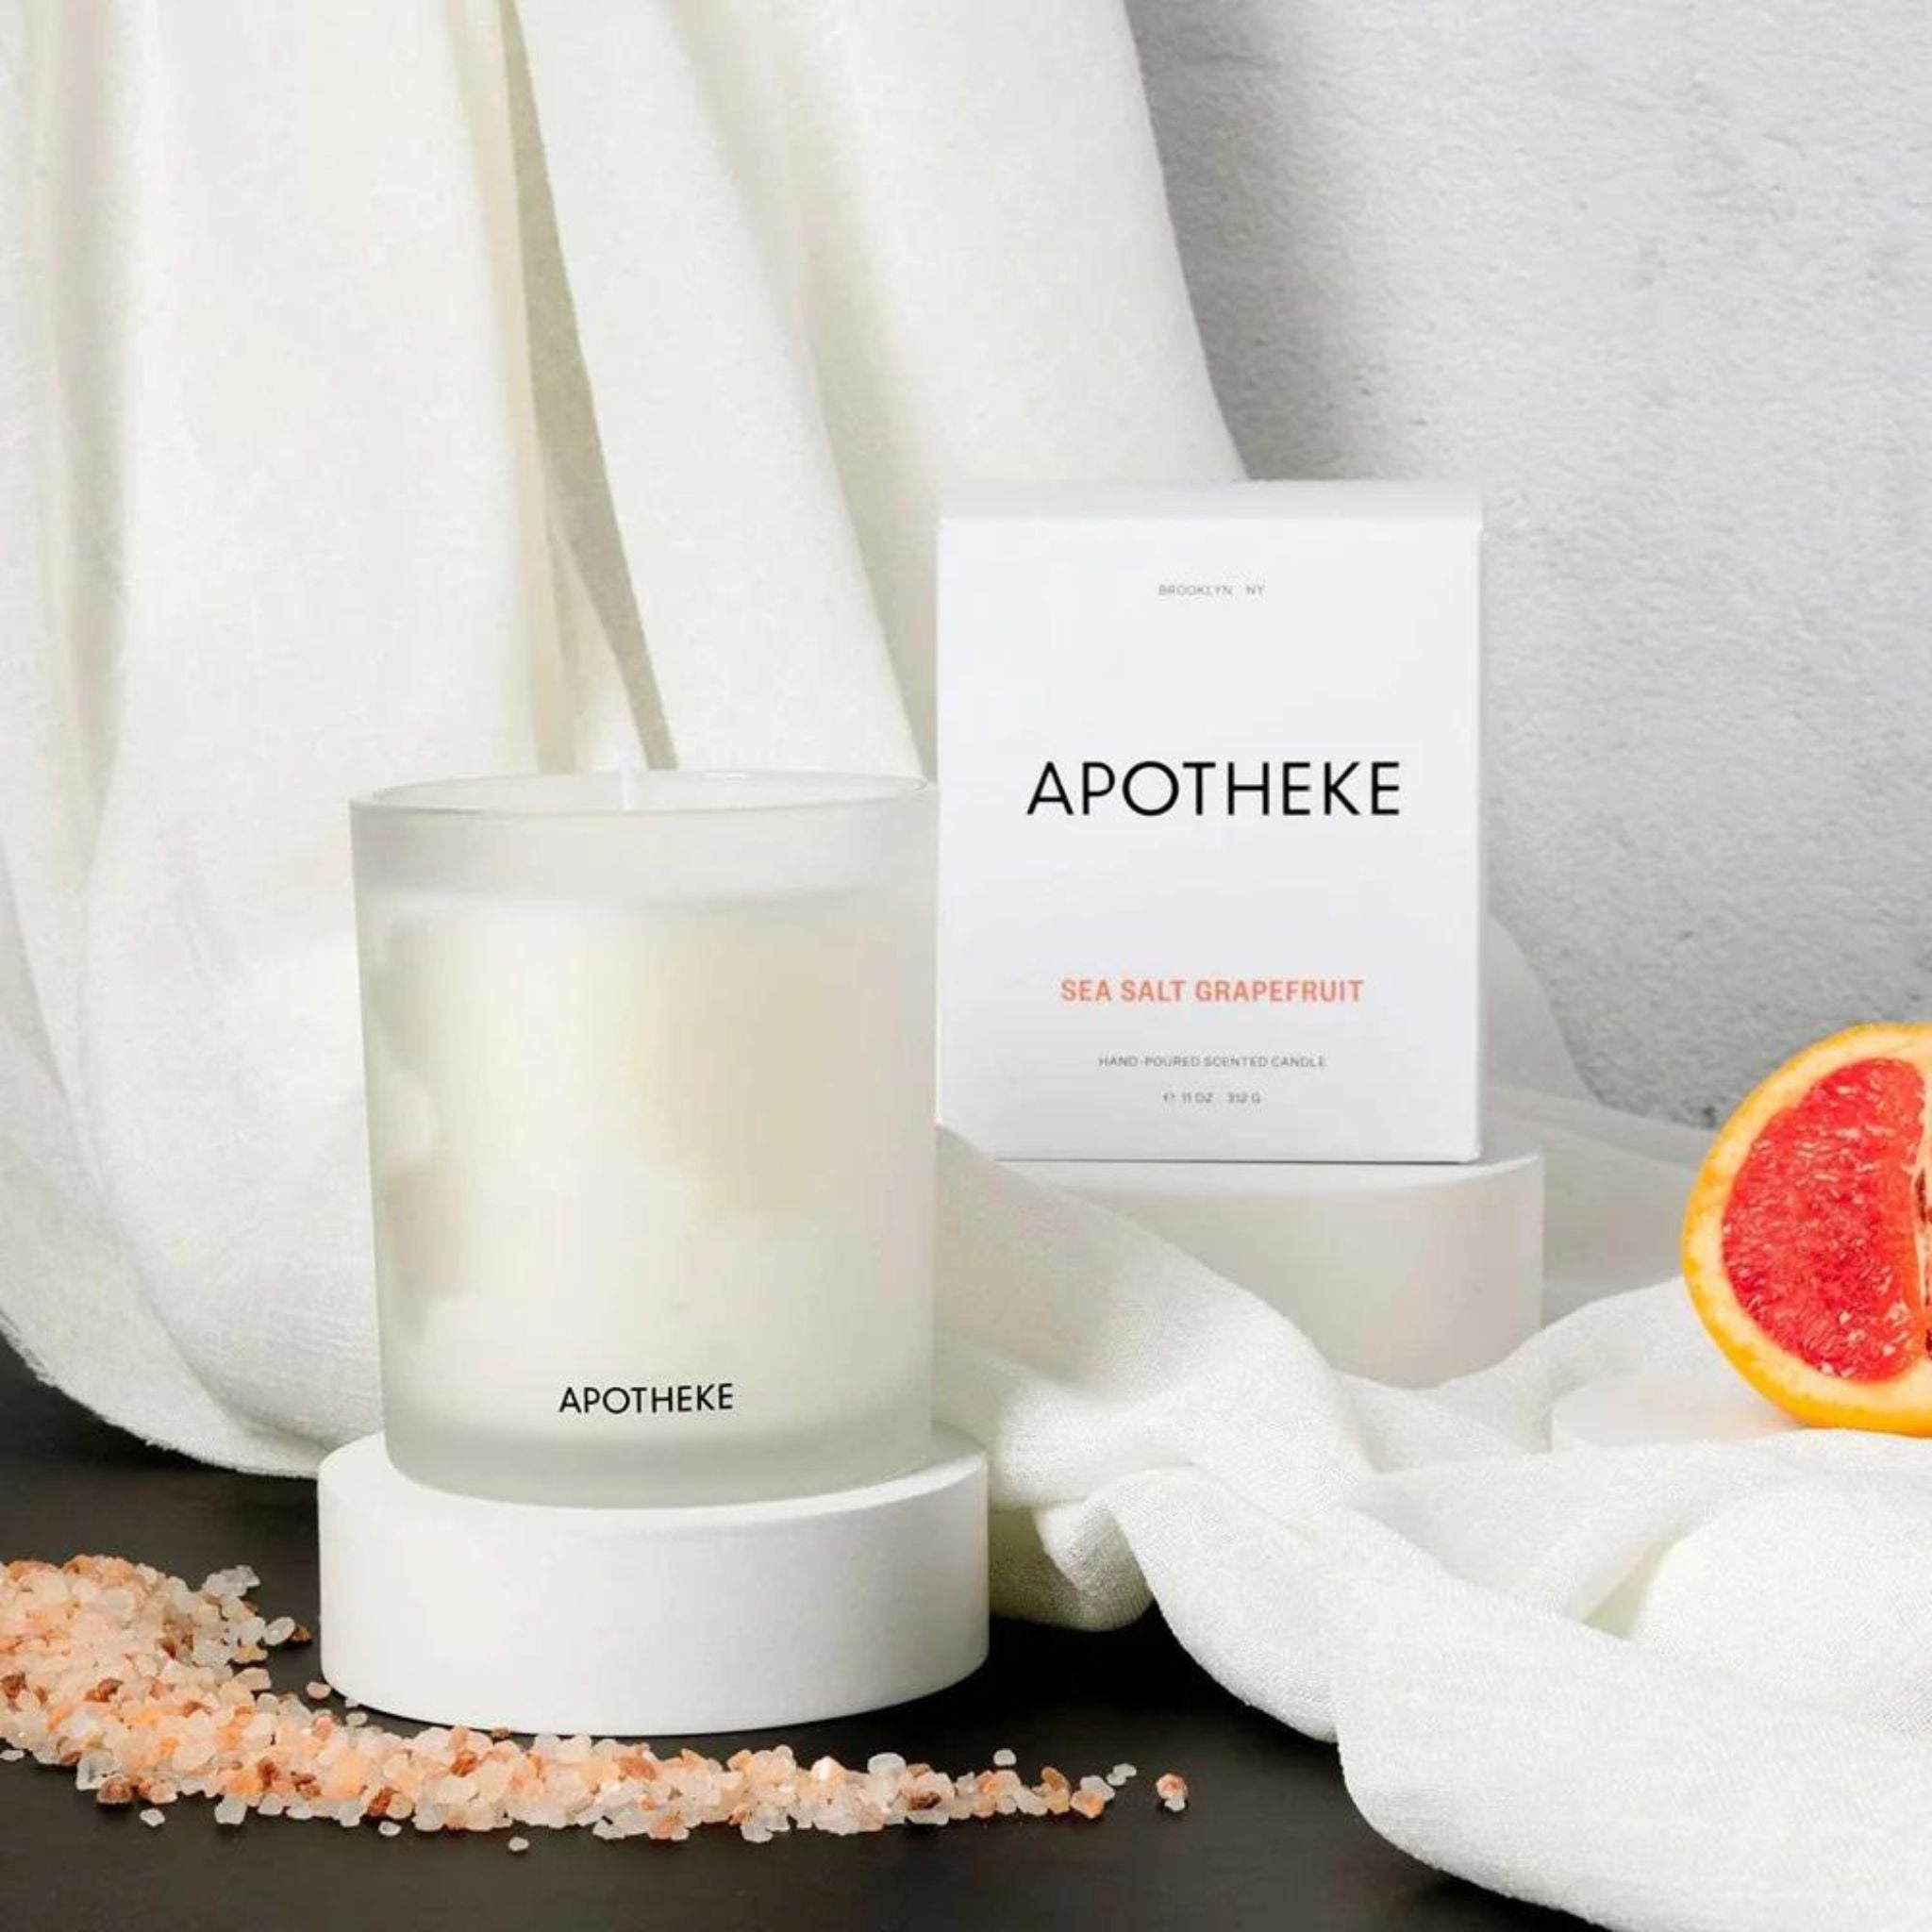 Simply Elevated - Signature Store Scent - Our Sea Salt Grapefruit Candle is the smell of summer time. Notes of juicy ripe grapefruit and black pepper intertwined with sea salt blend together for a bright, energizing scent. Balanced with dew drop accords and tarragon, 